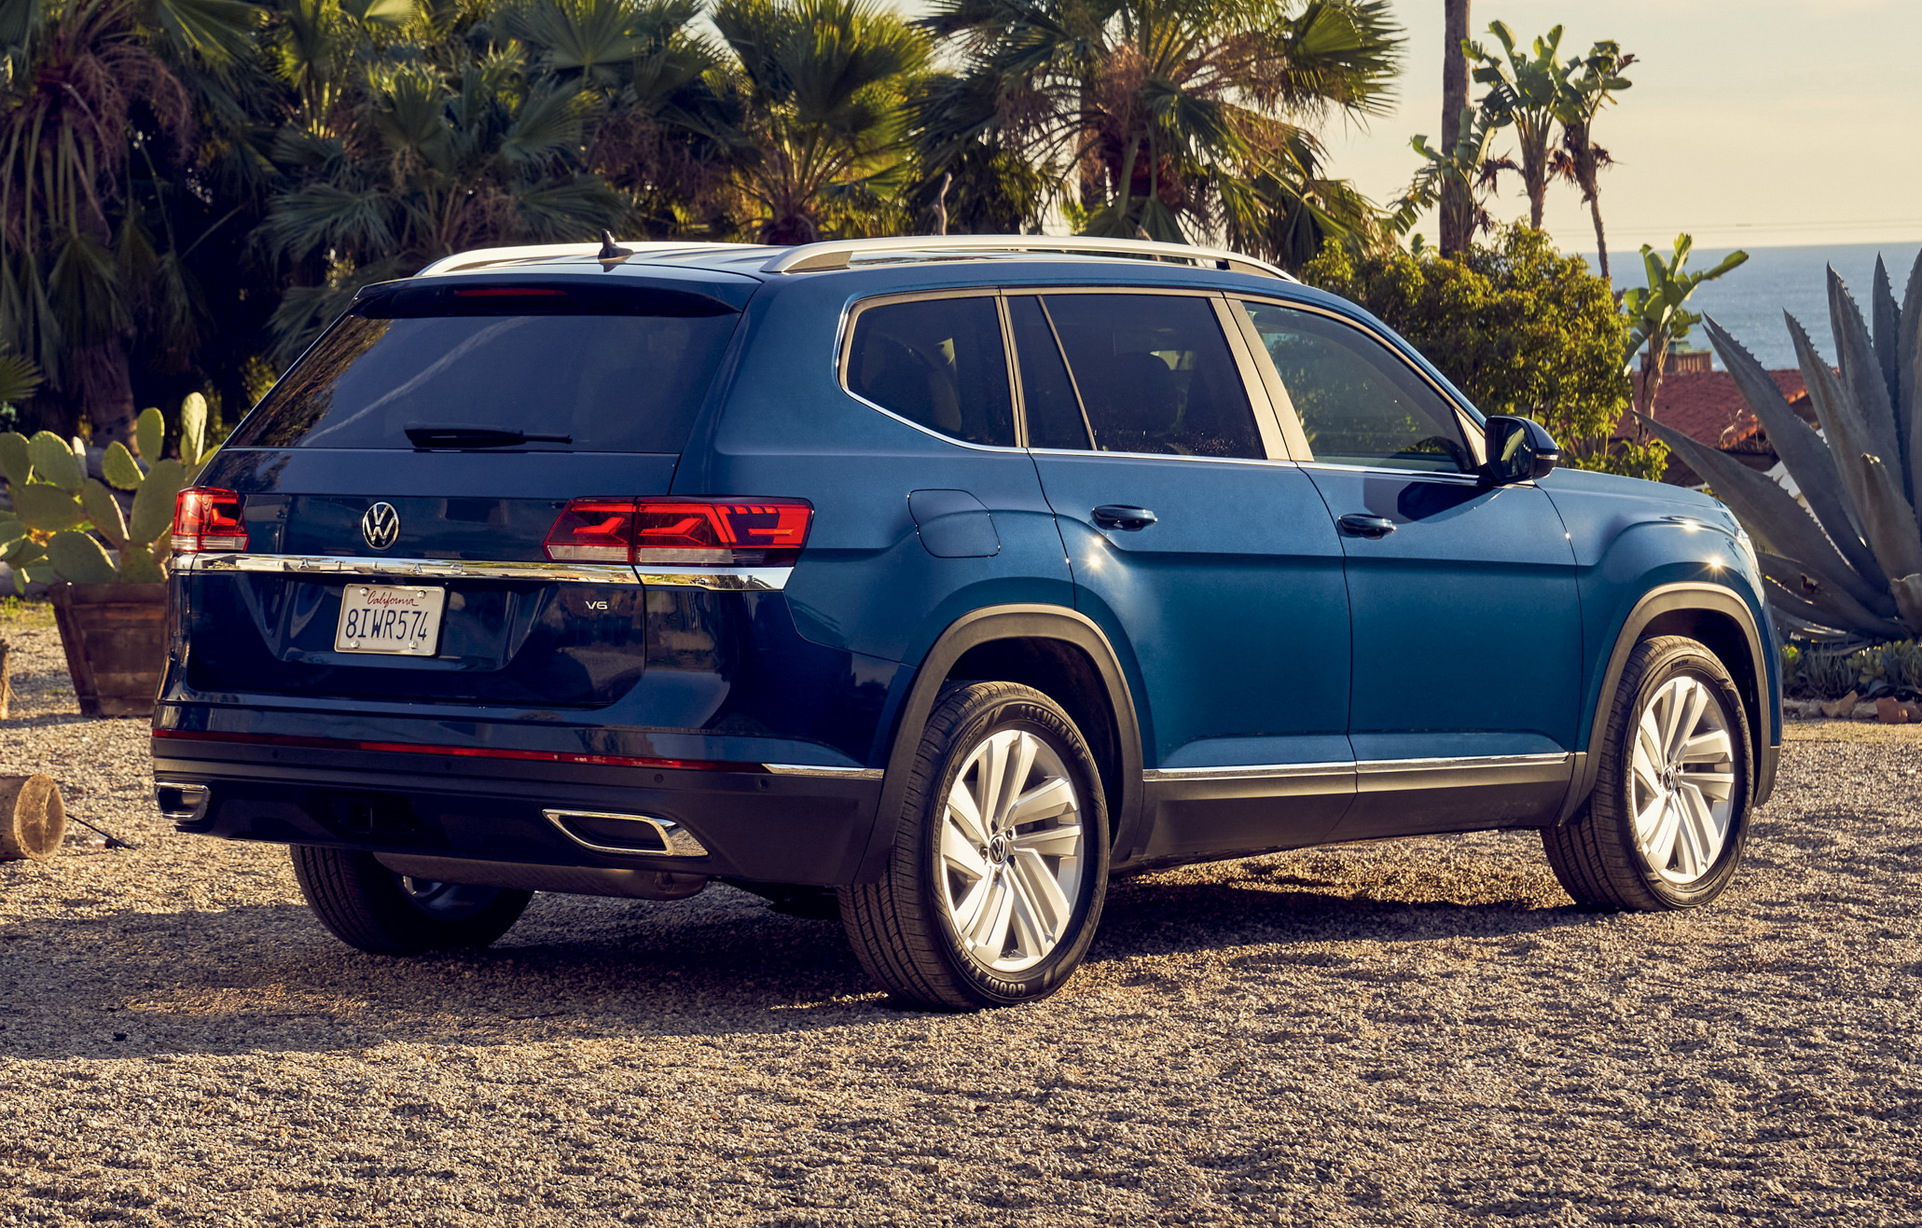 2021 VW Atlas Refreshed With Bolder Design Cues And More Technology